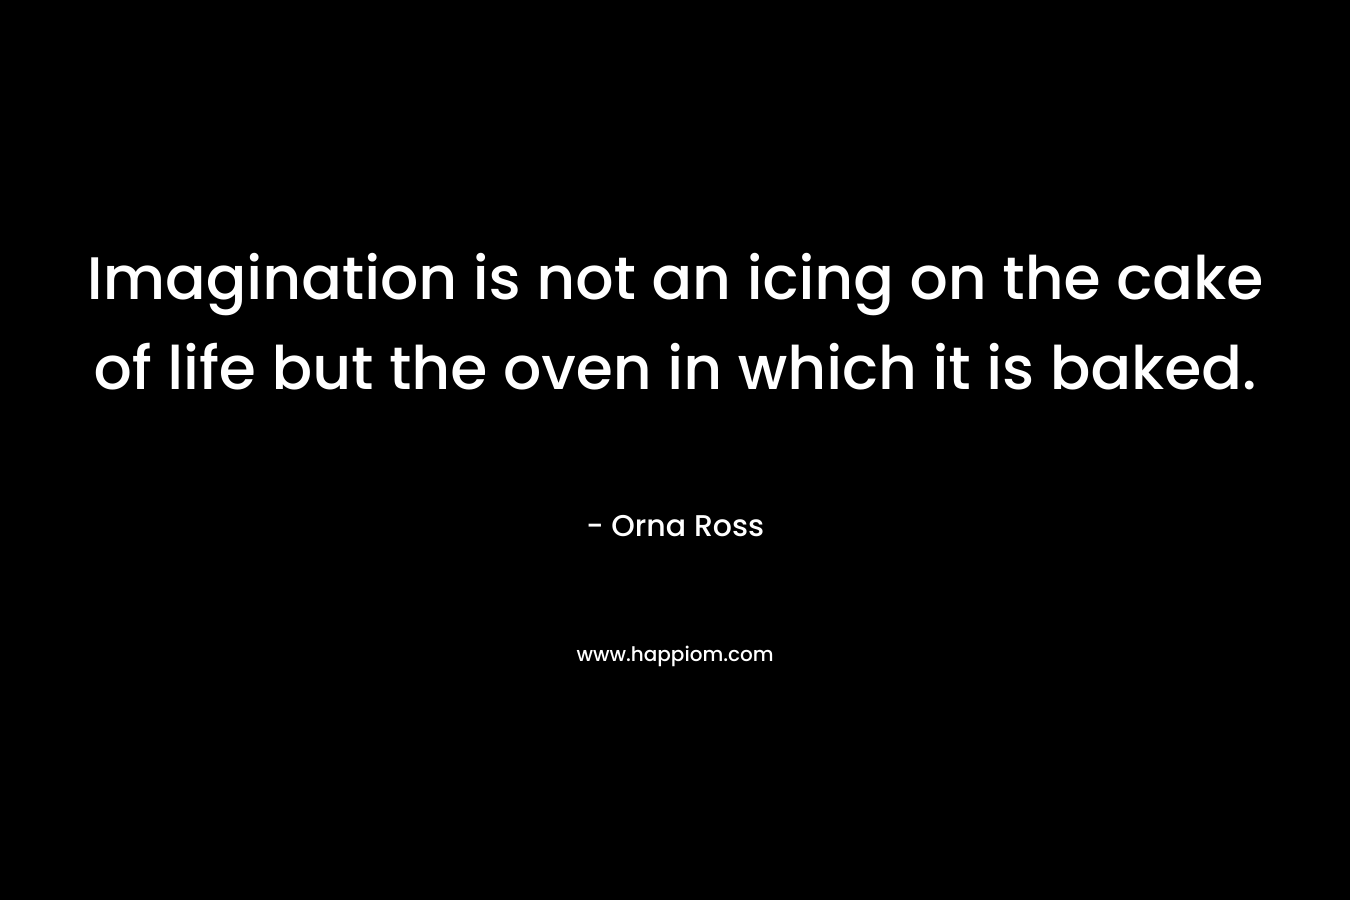 Imagination is not an icing on the cake of life but the oven in which it is baked. – Orna Ross